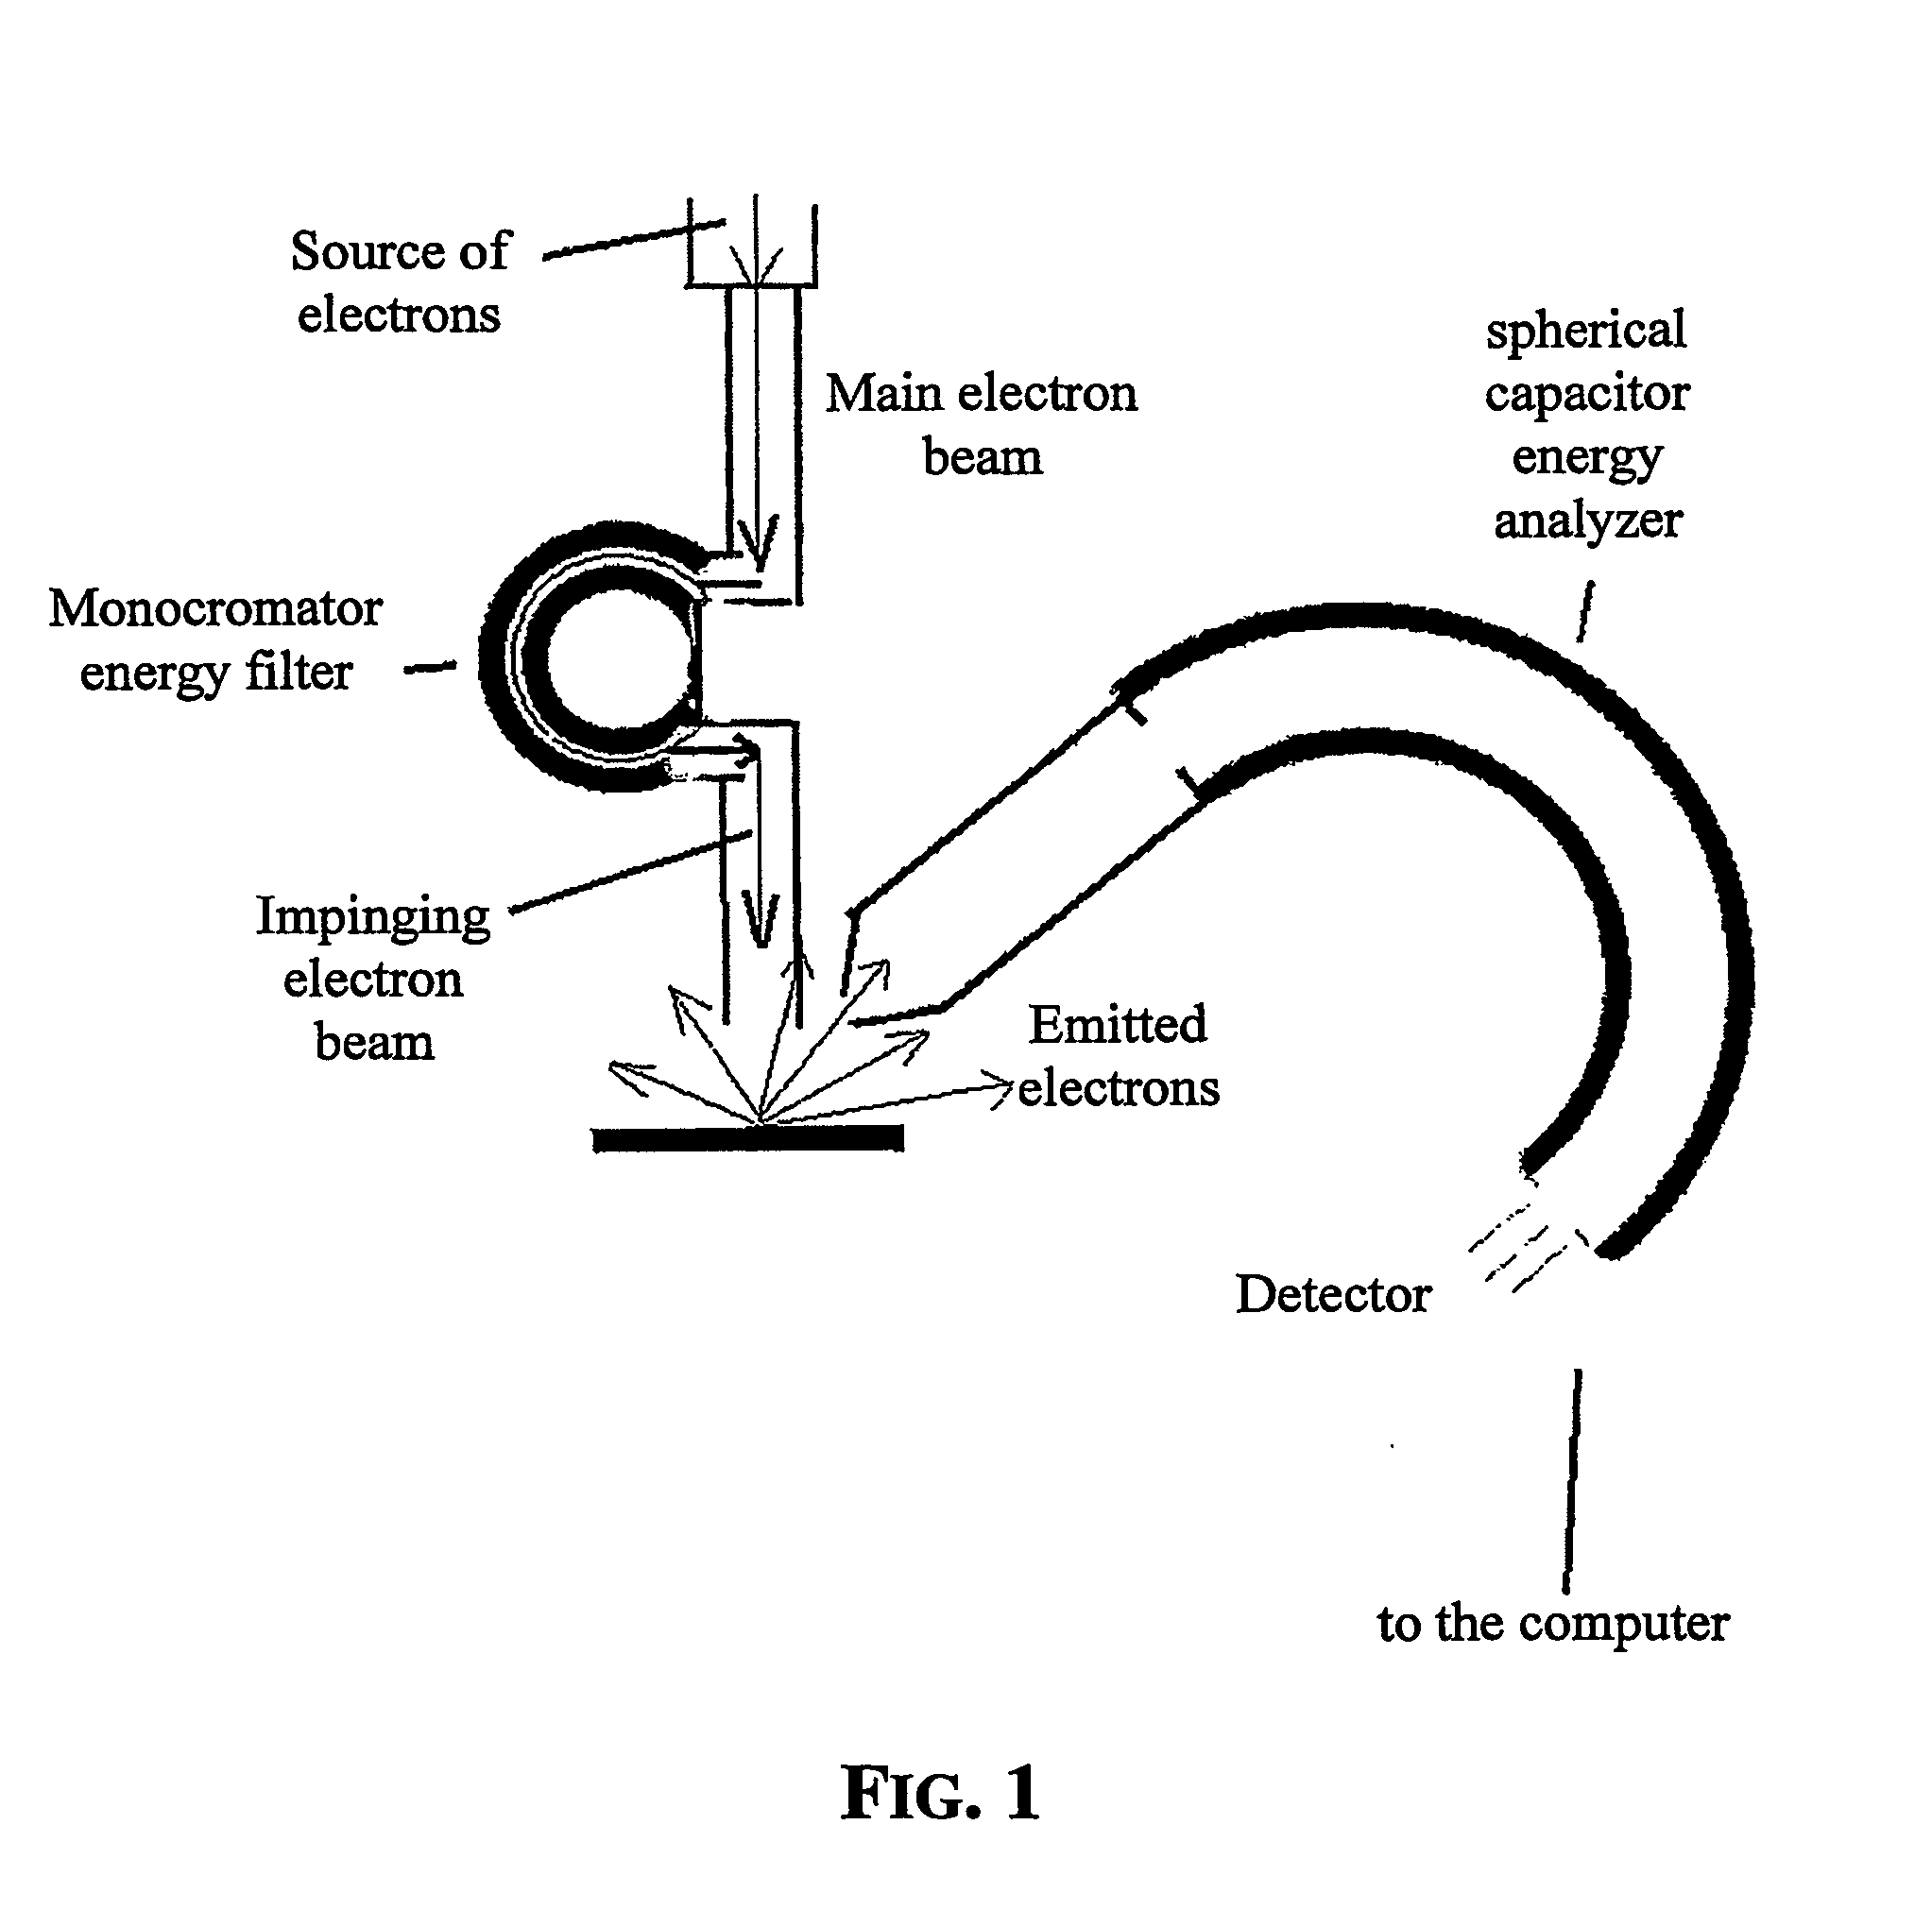 Electron Spectroscope With Emission Induced By A Monochromatic Electron Beam